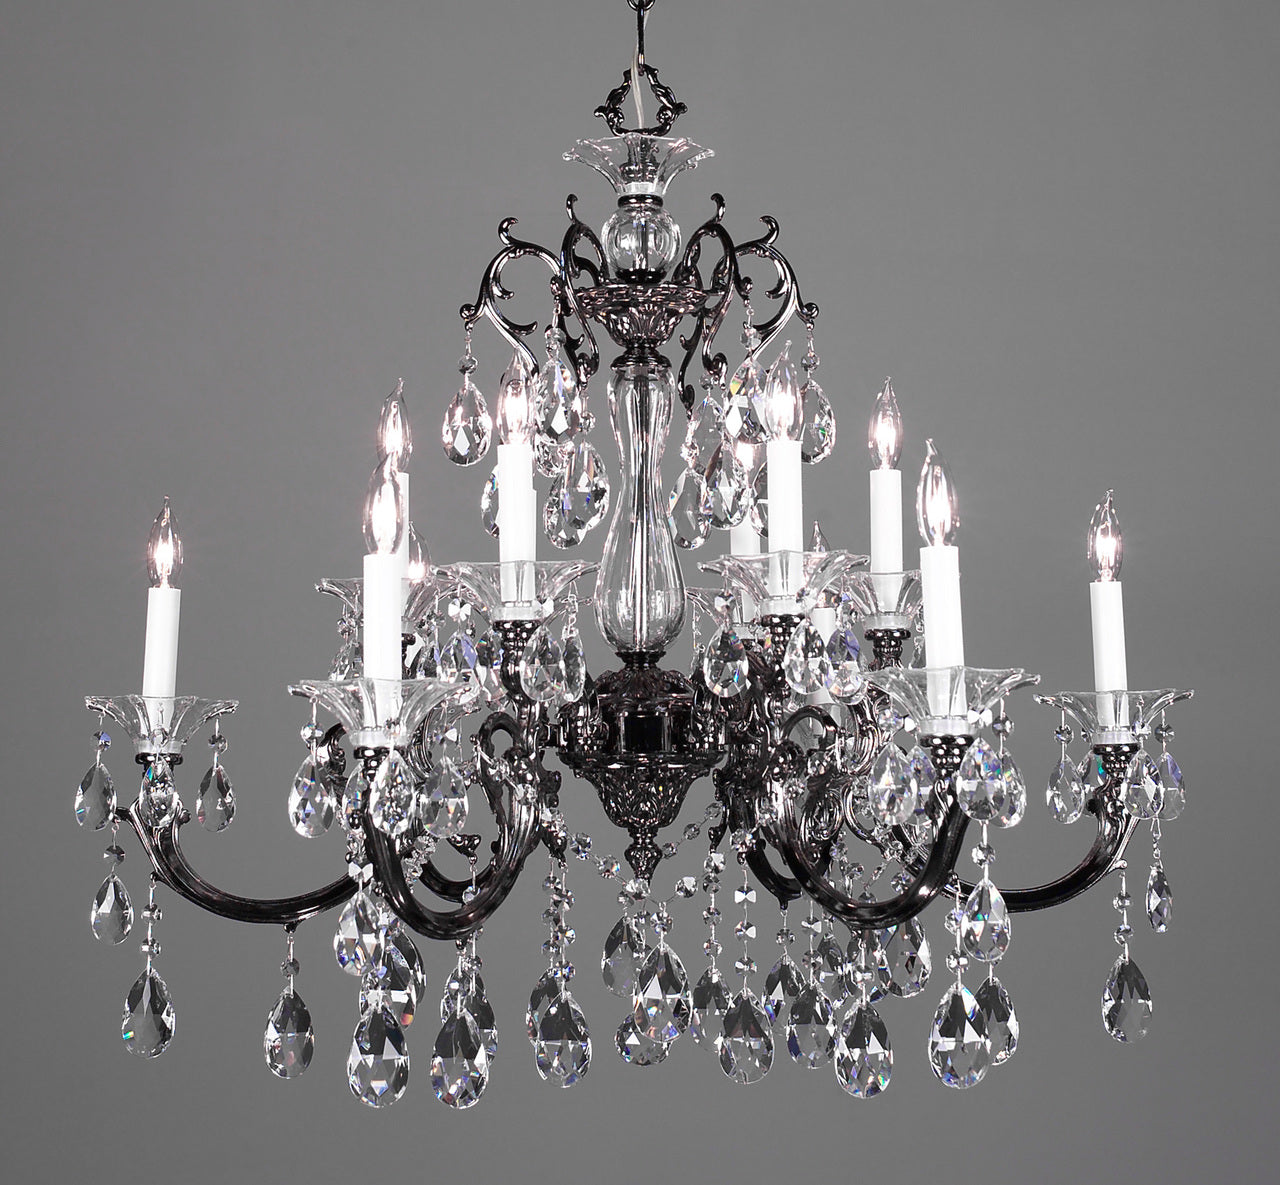 Classic Lighting 57063 G S Via Lombardi Crystal Chandelier in 24k Gold (Imported from Spain)